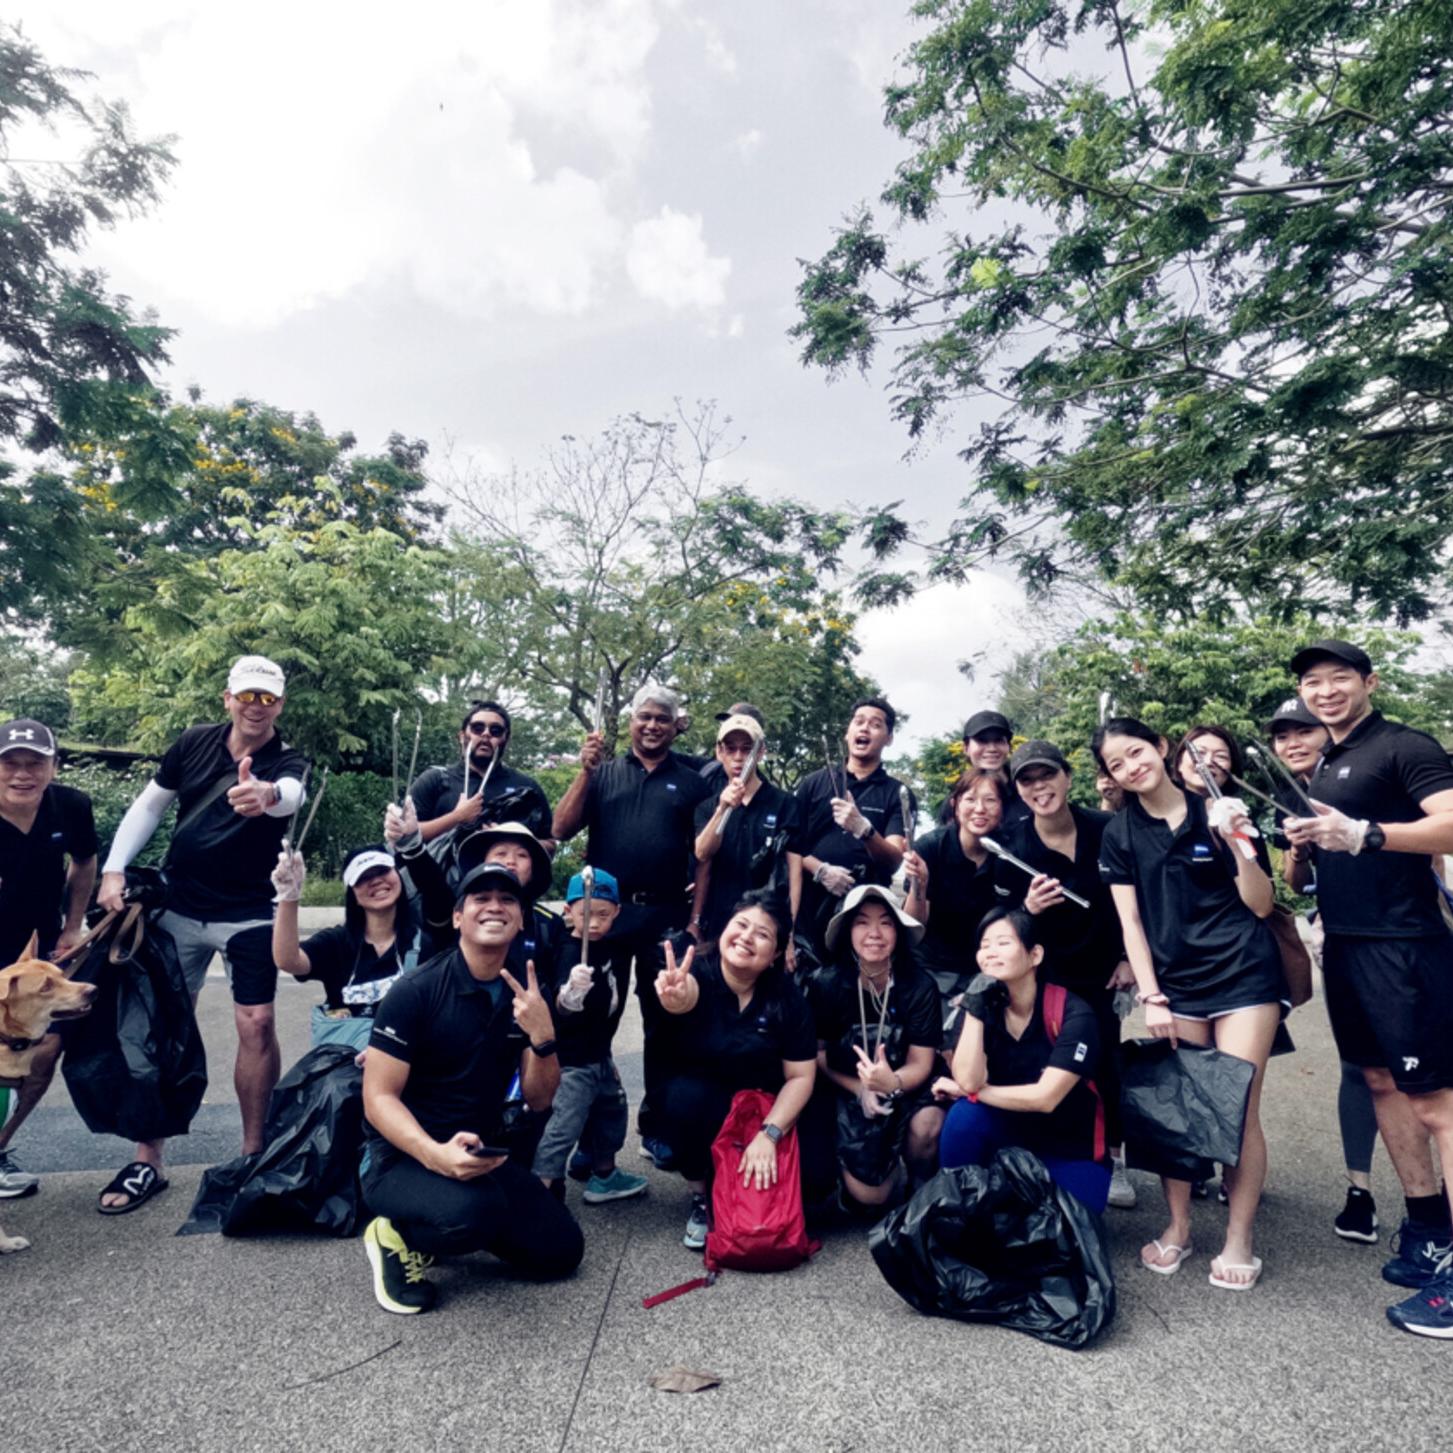 ZEISS employees in Singapore picking up litter on earth day